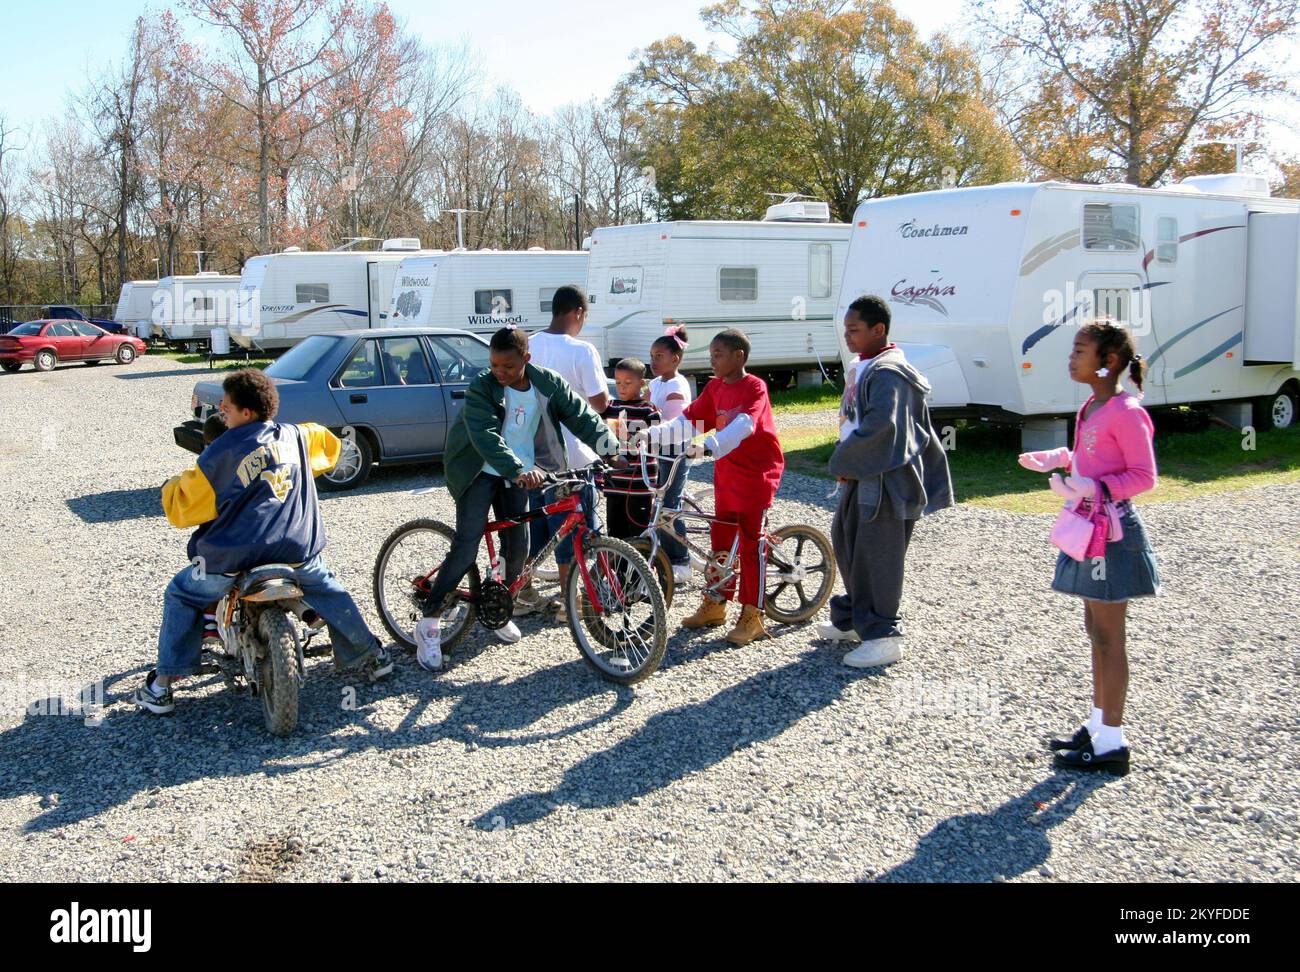 Hurricane Katrina, Baker, LA December 25, 2005 - Evacuee children waste no time enjoying their Christmas presents at the FEMA trailer park where they have been living since Hurricane Katrina forced them from their New Orleans homes. Over 600 families moved to Baker after the disaster and are living in a FEMA park. Stock Photo